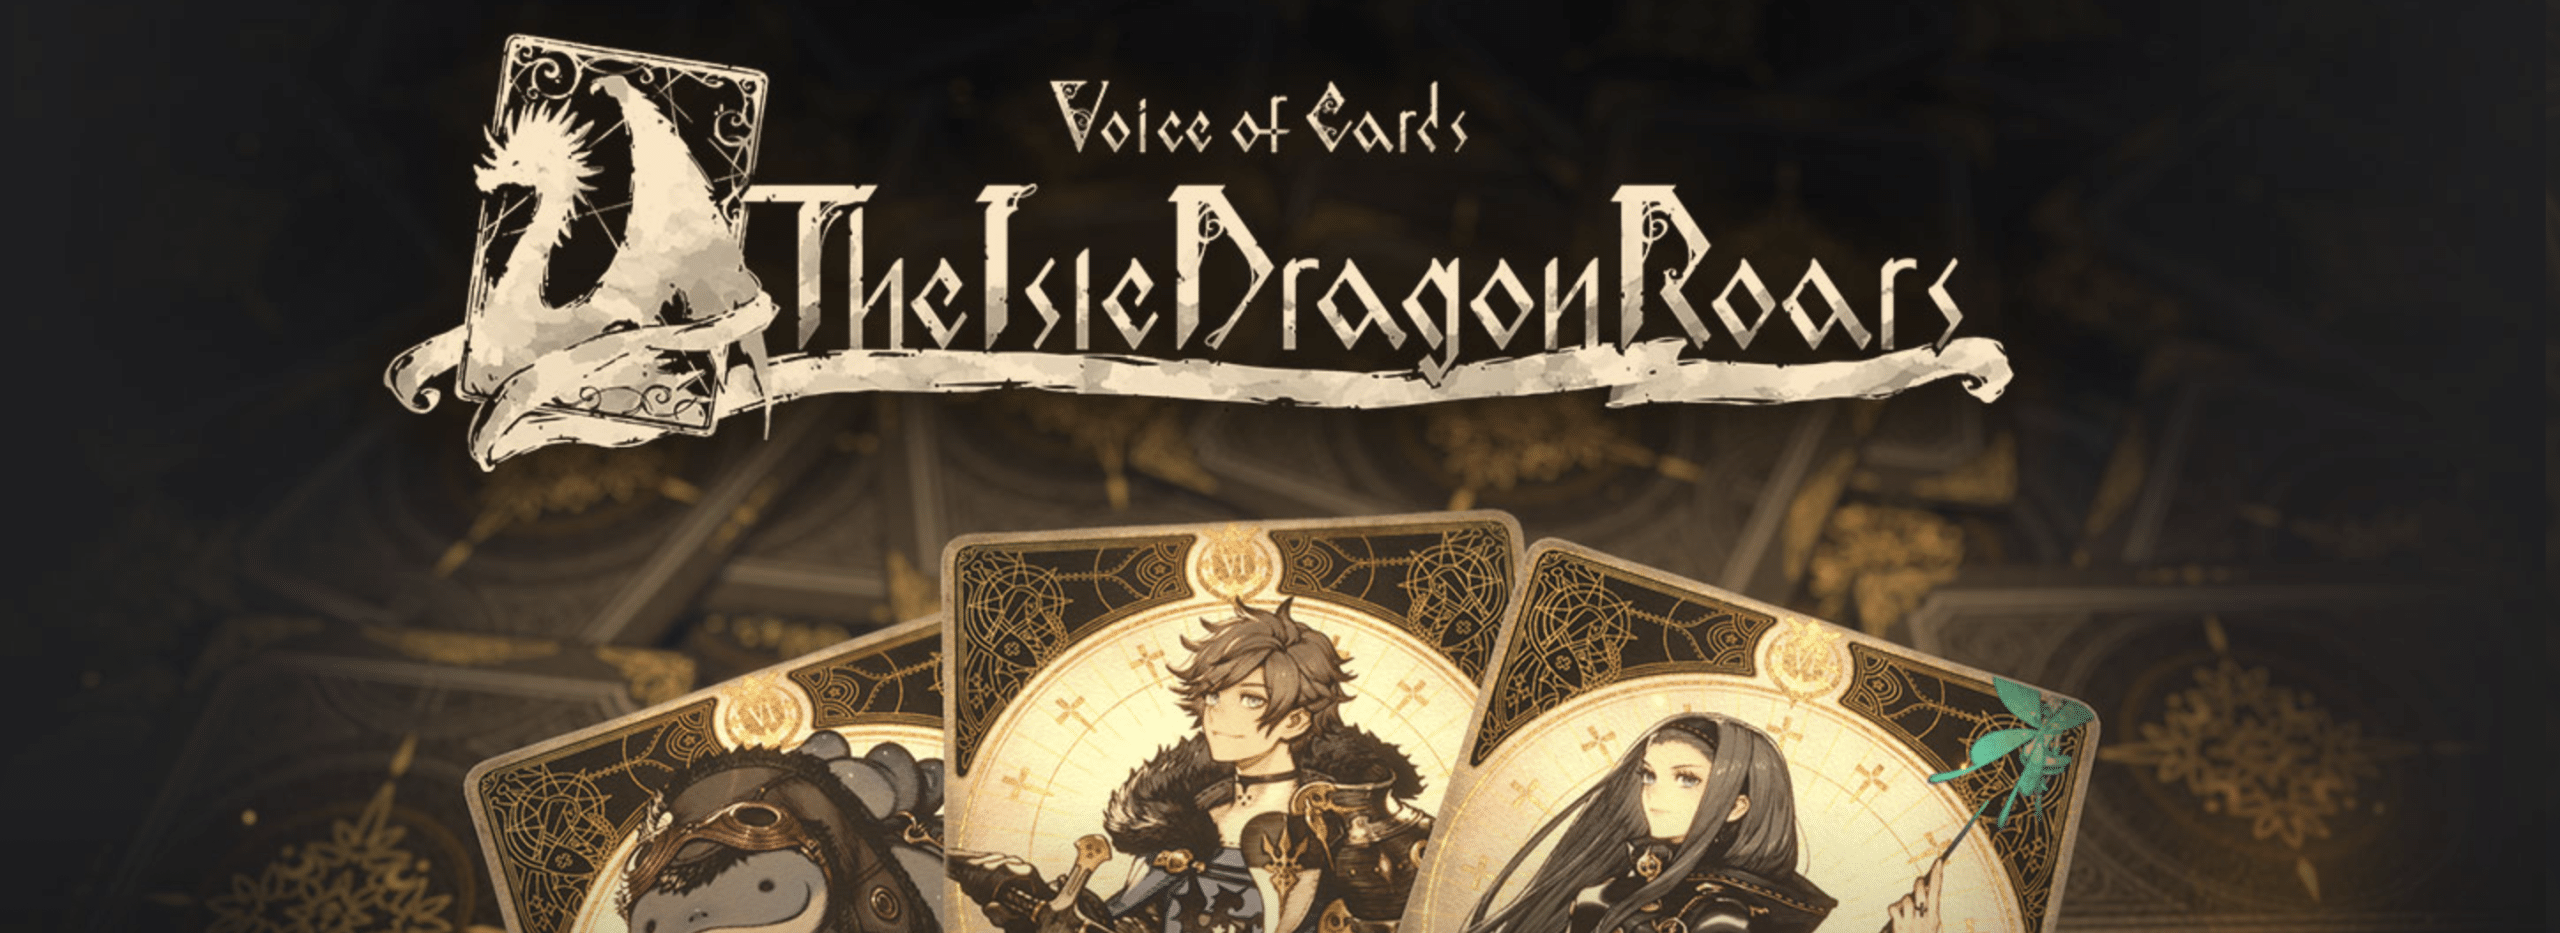 Voice of Cards: The Isle Dragon Roars Review 56